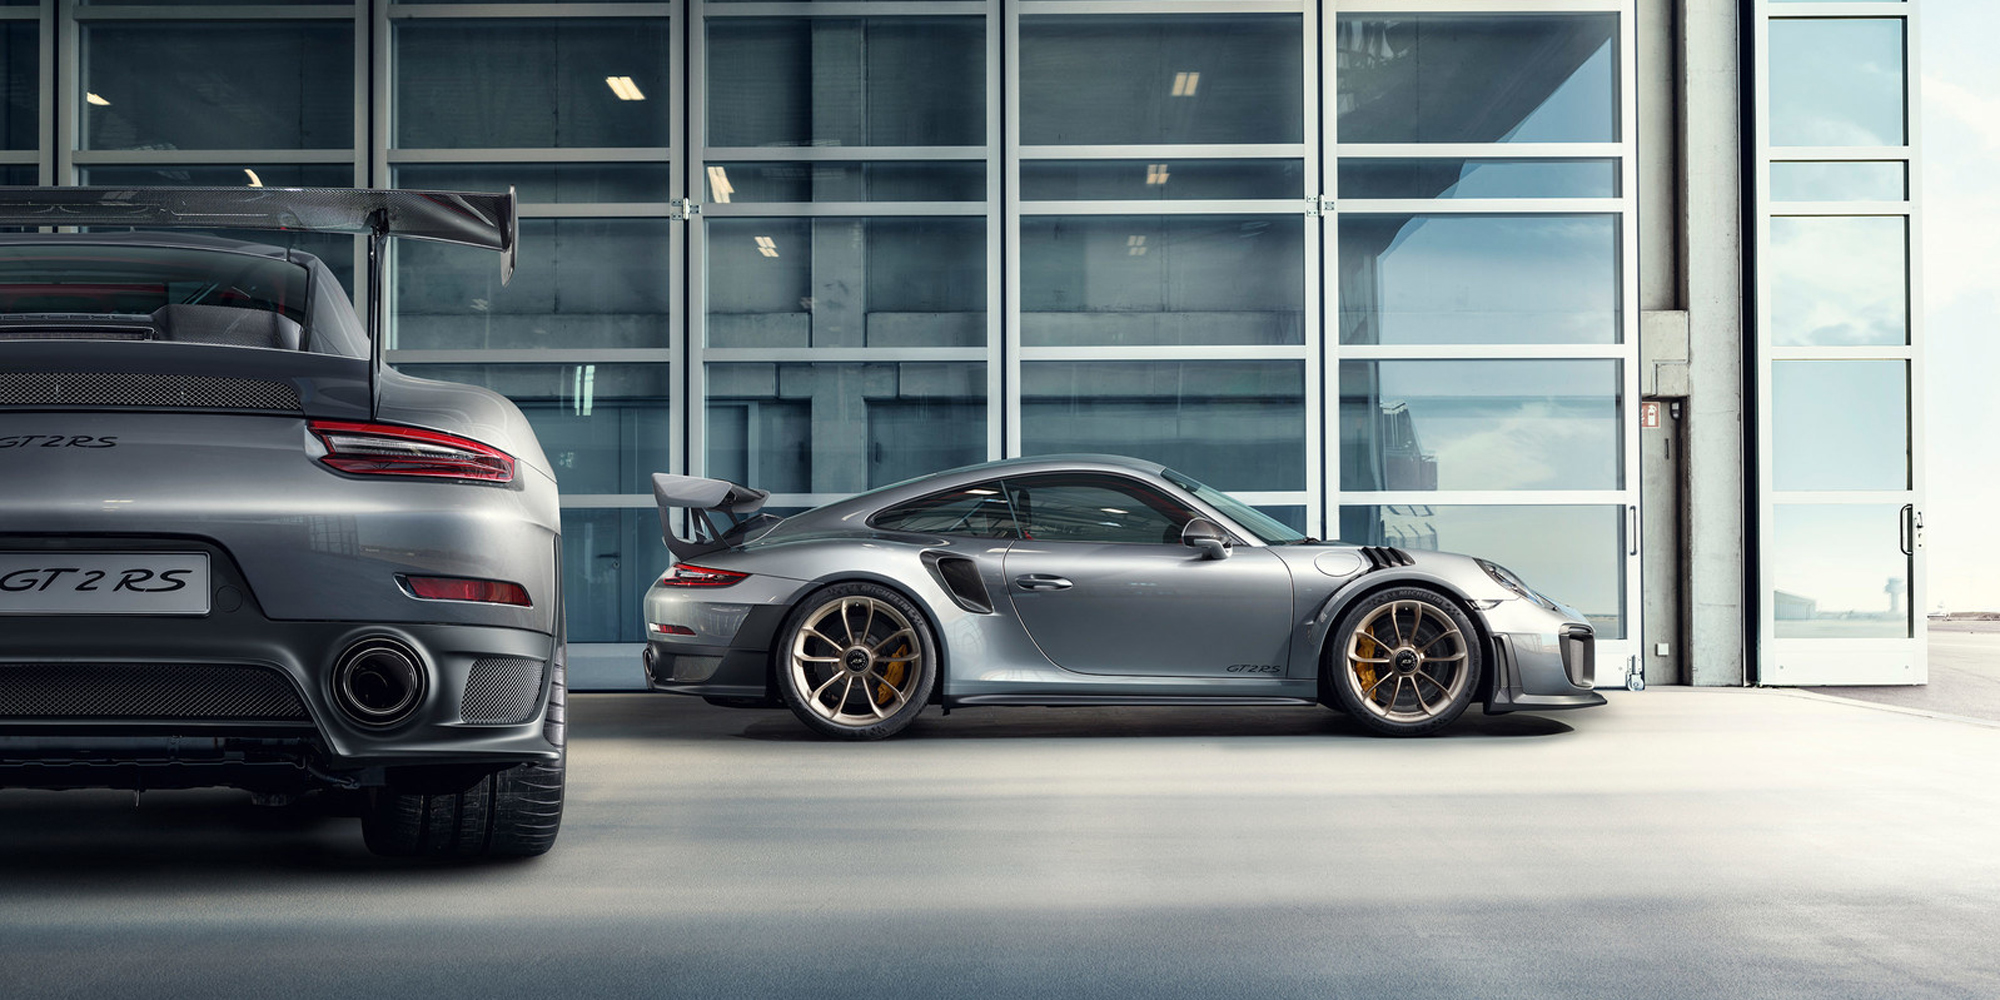 Porsches 911 Gt2 Rs Is The Most Powerful 911 To Date